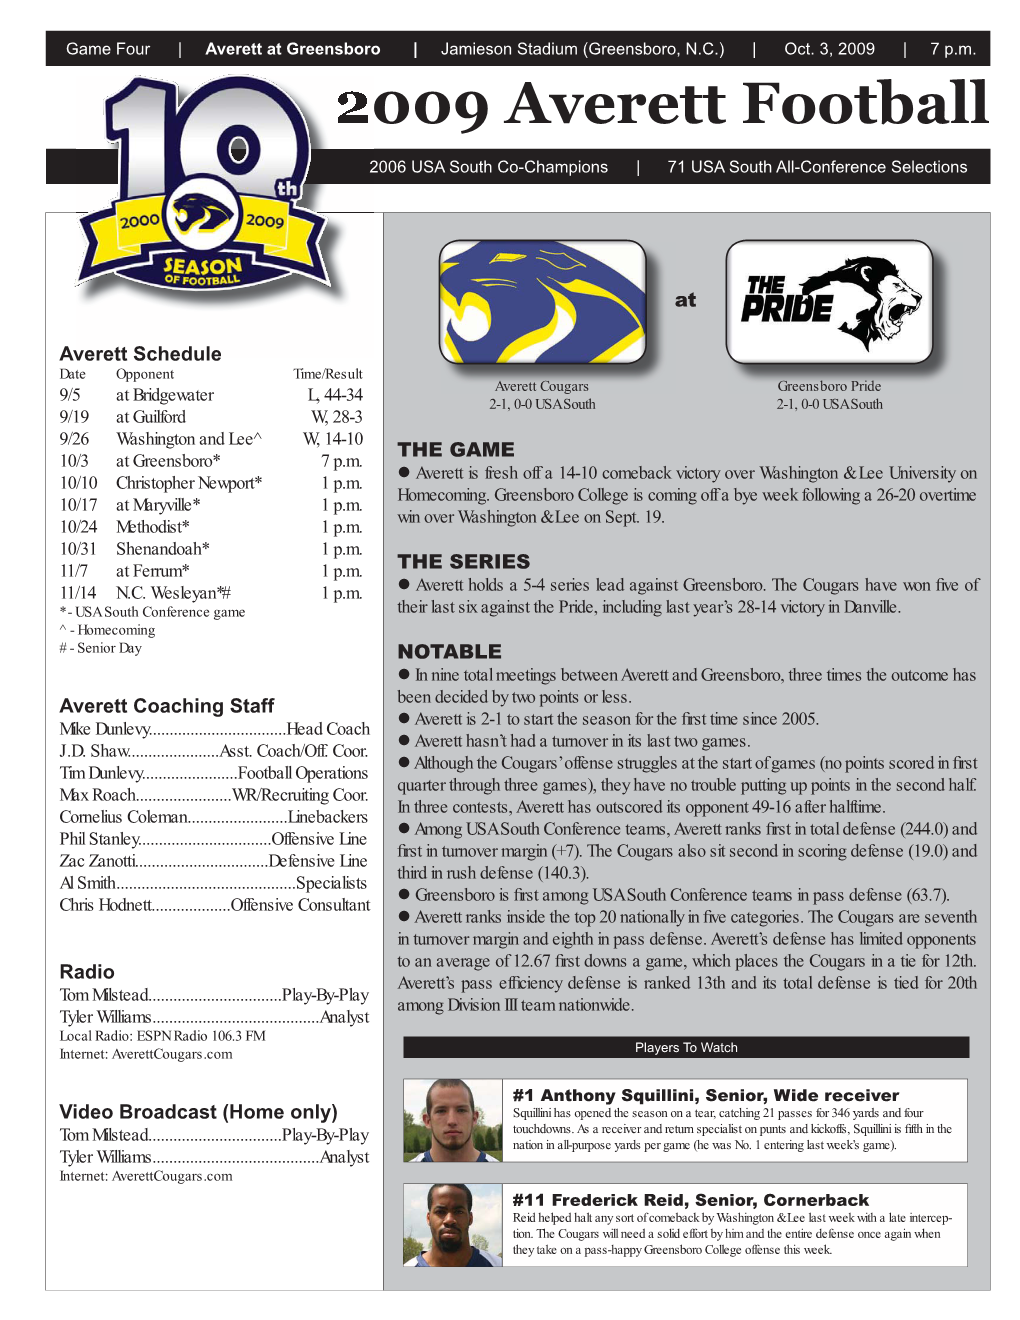 Football Game Notes 2009.Indd